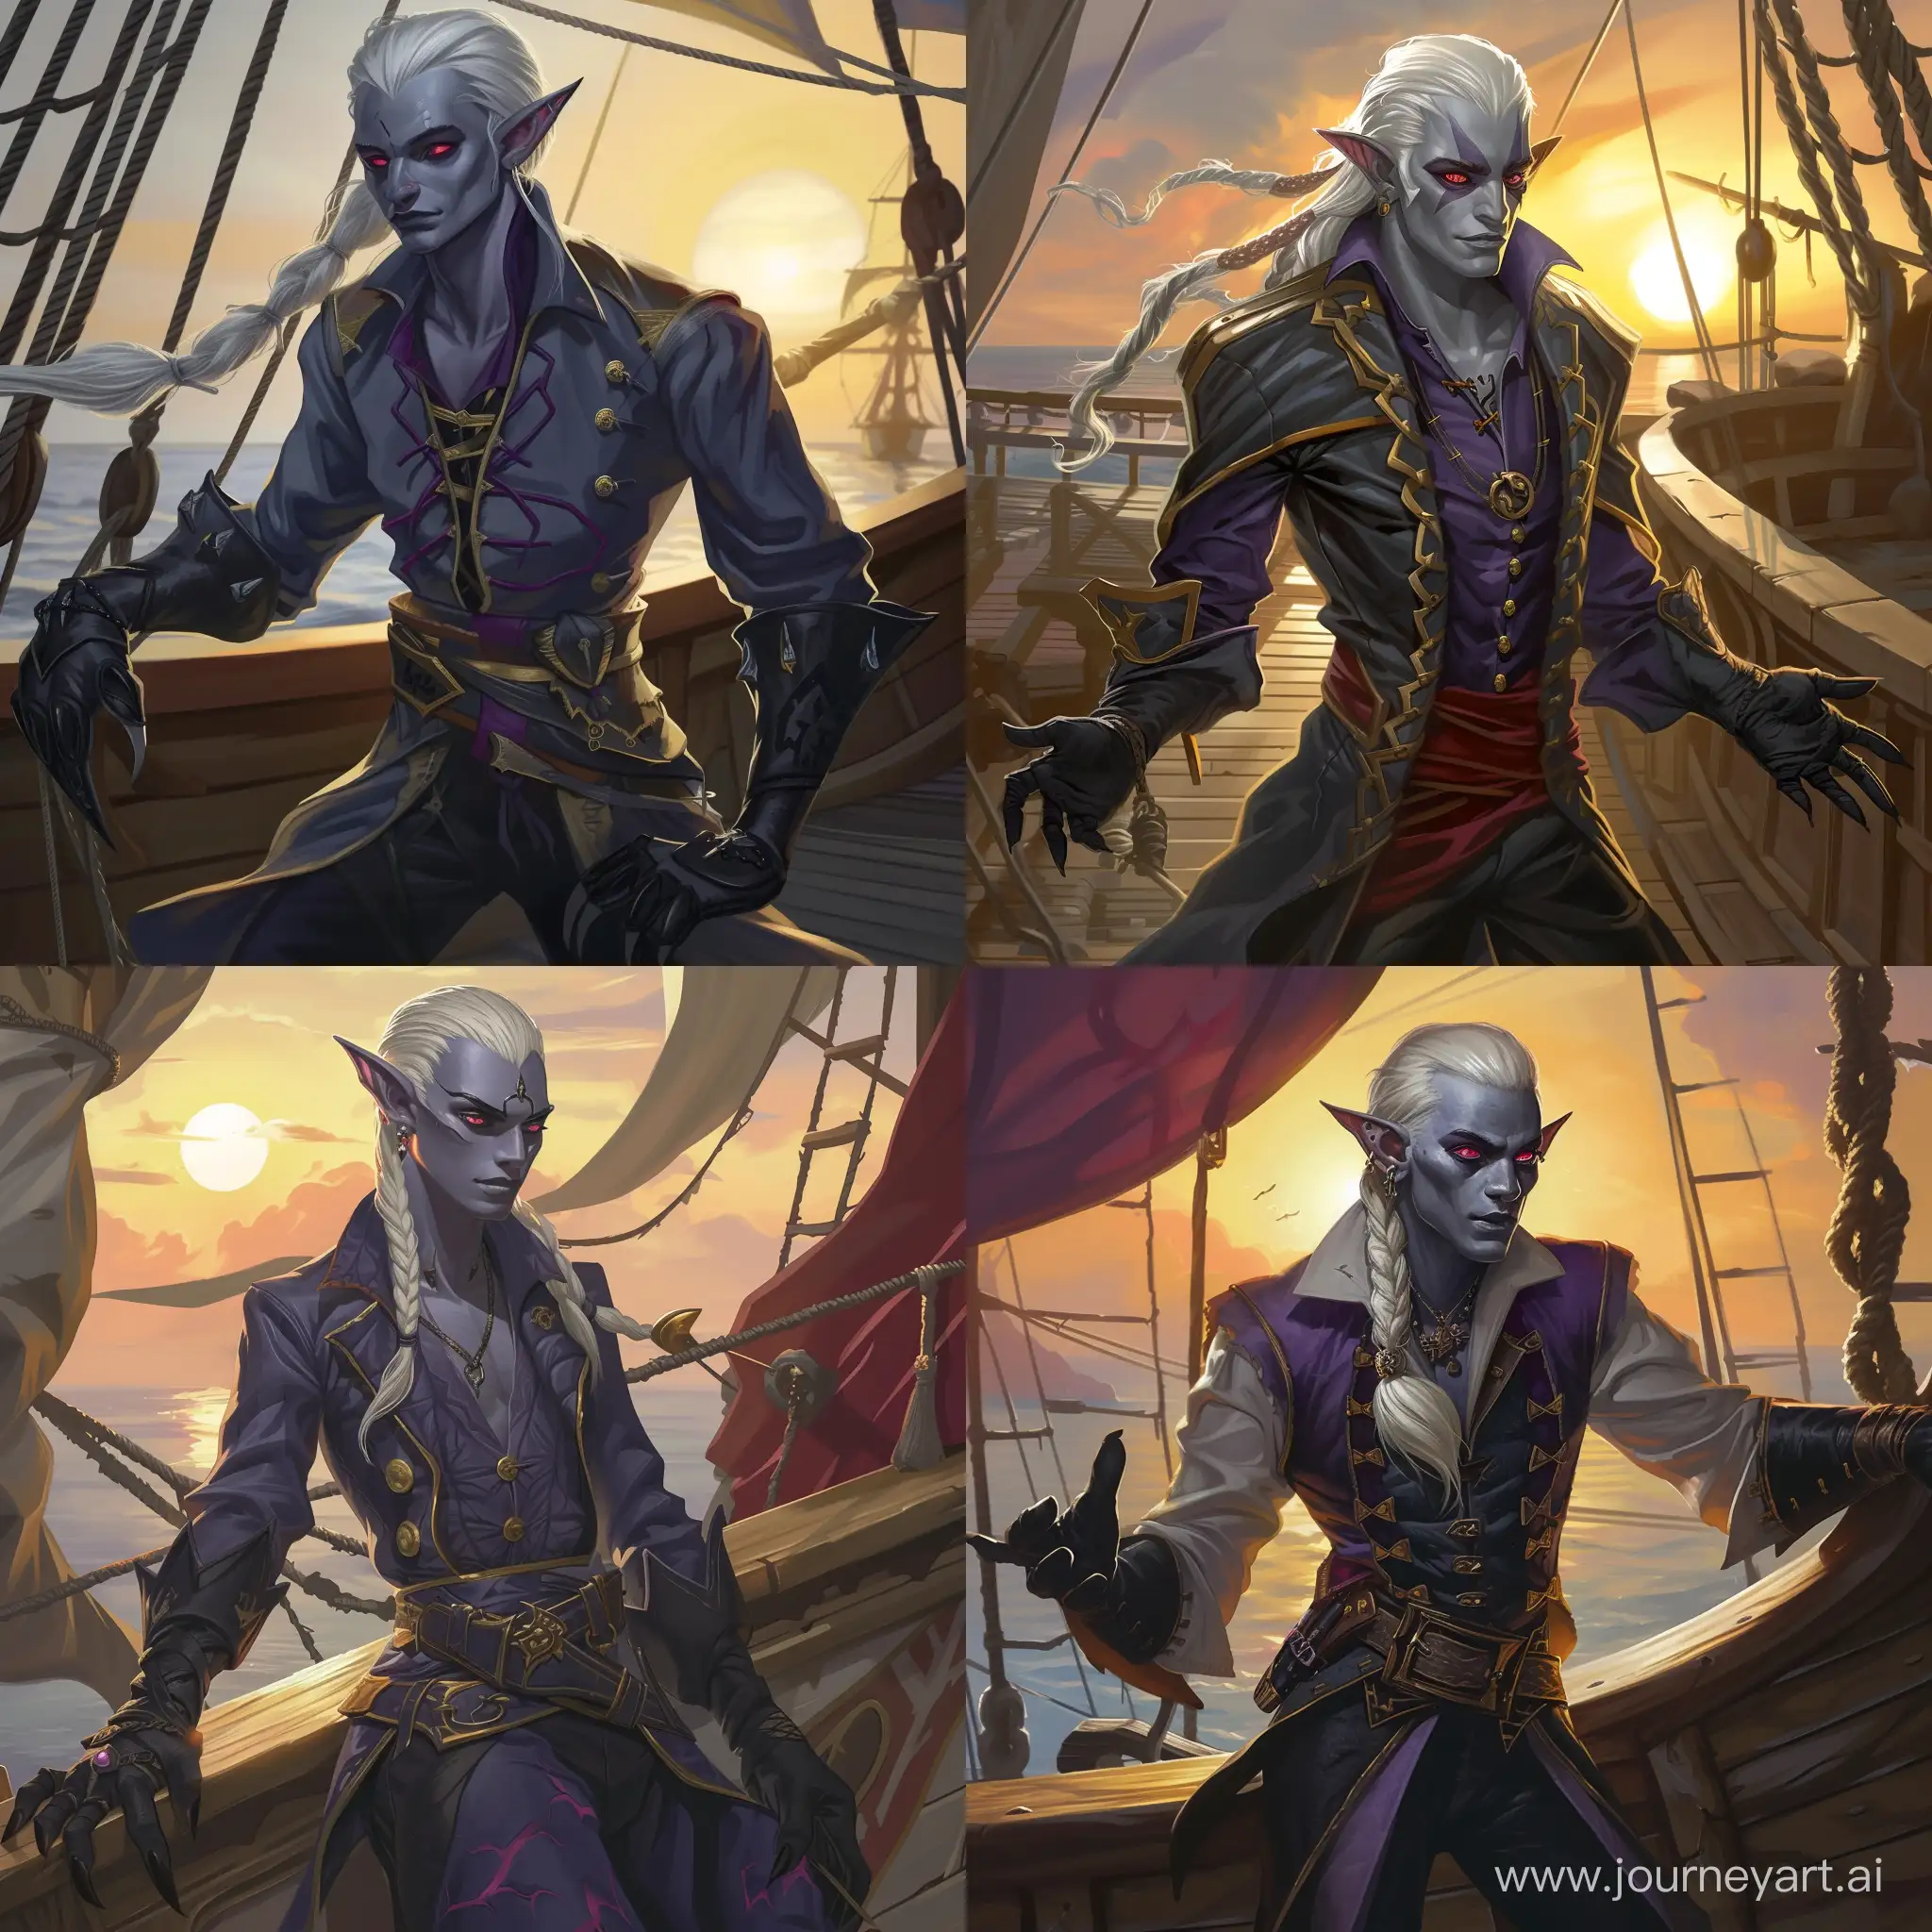 Drow-Rogue-Swashbuckler-on-Pirate-Ship-at-Sunset